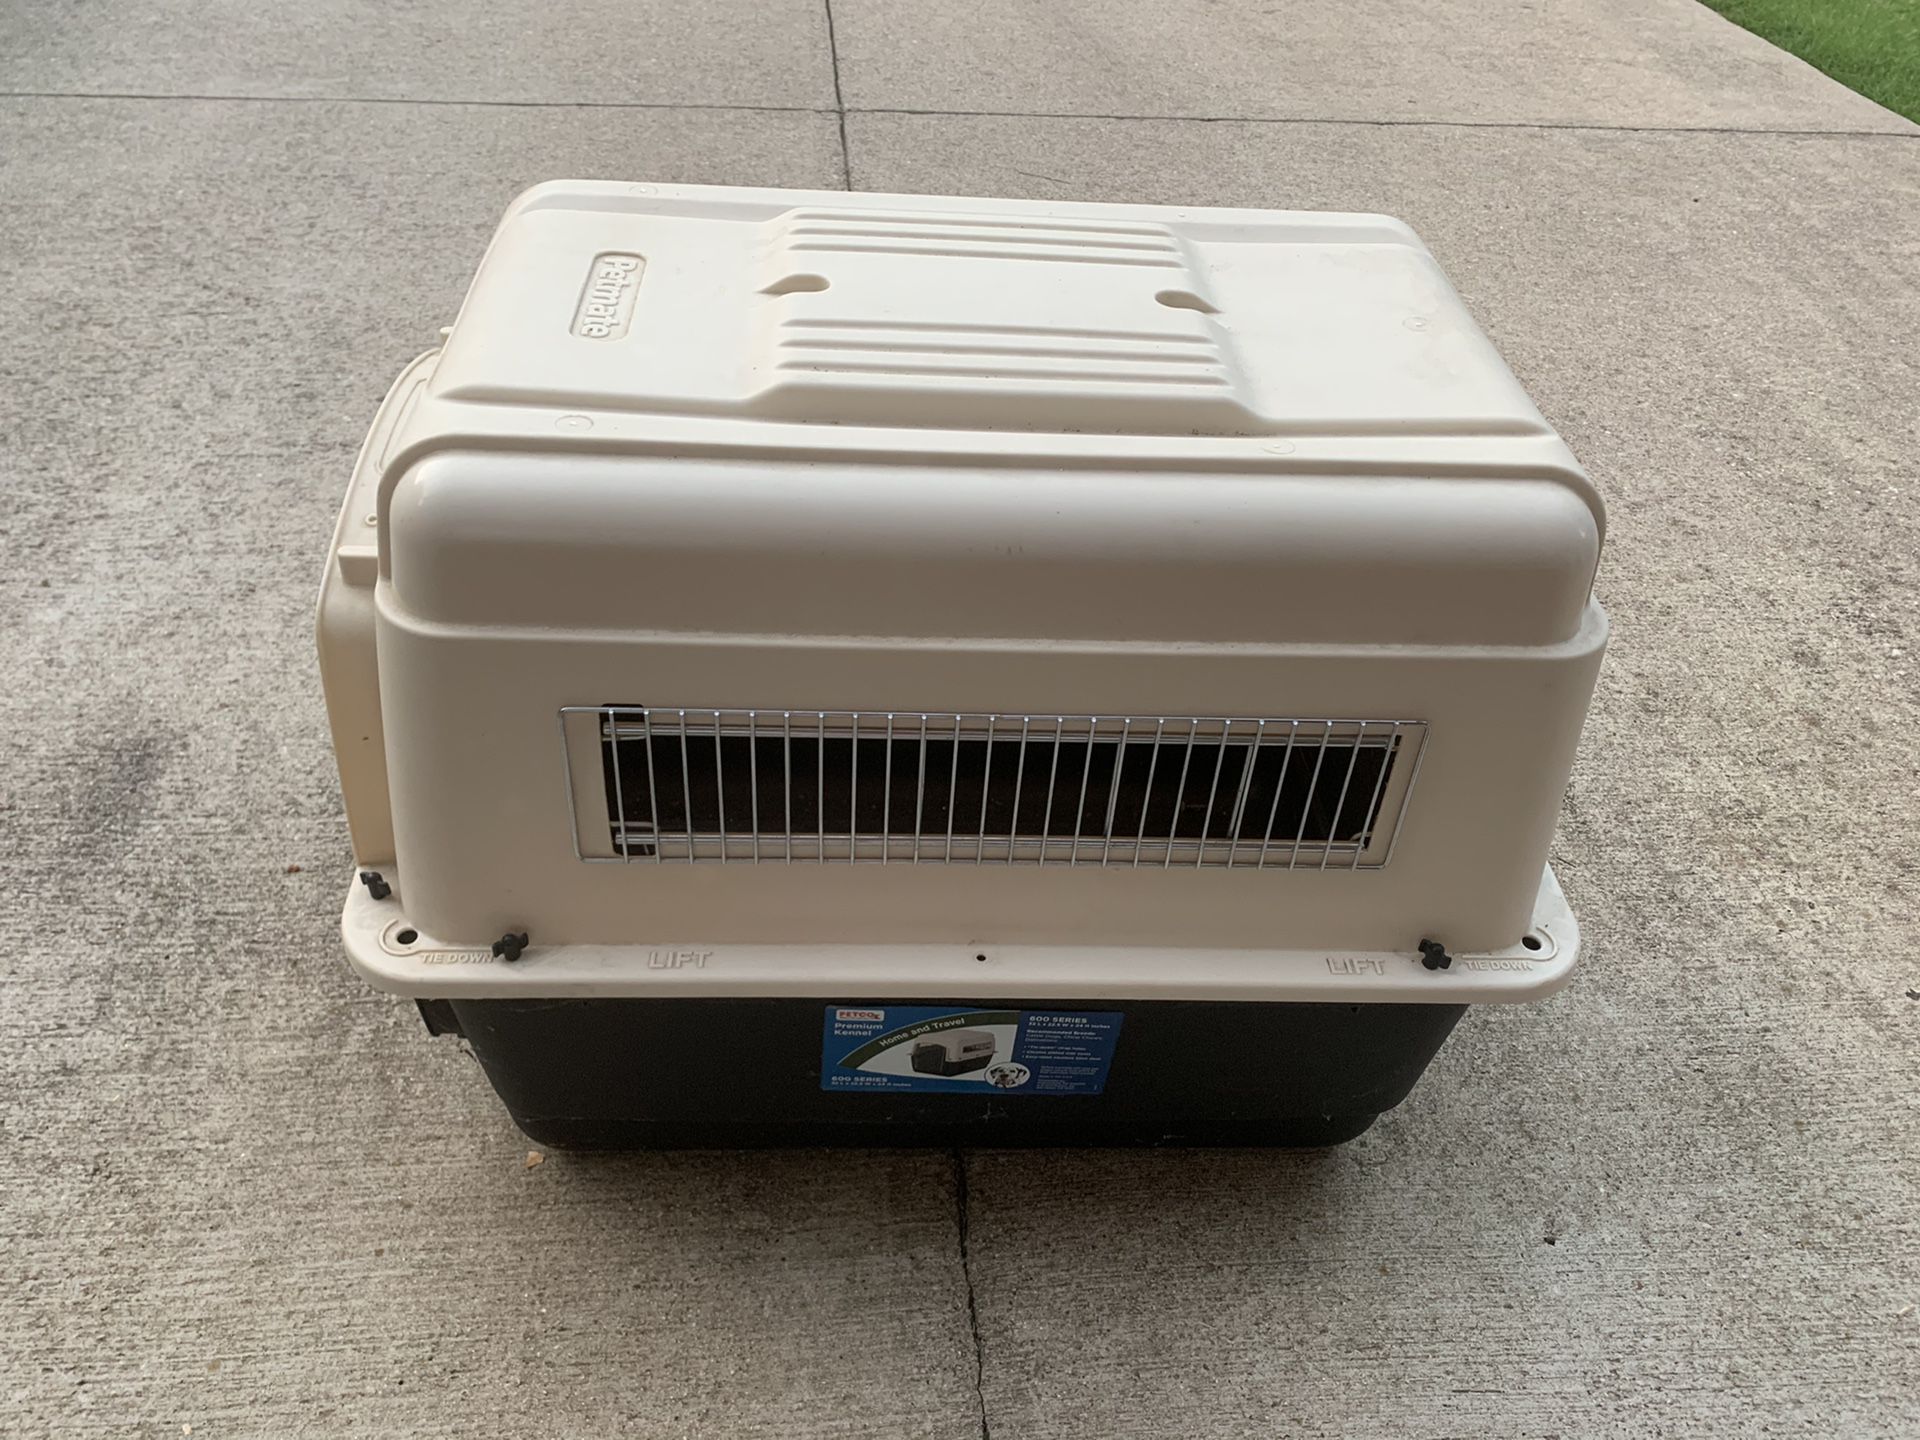 Petco series 600 dog kennel